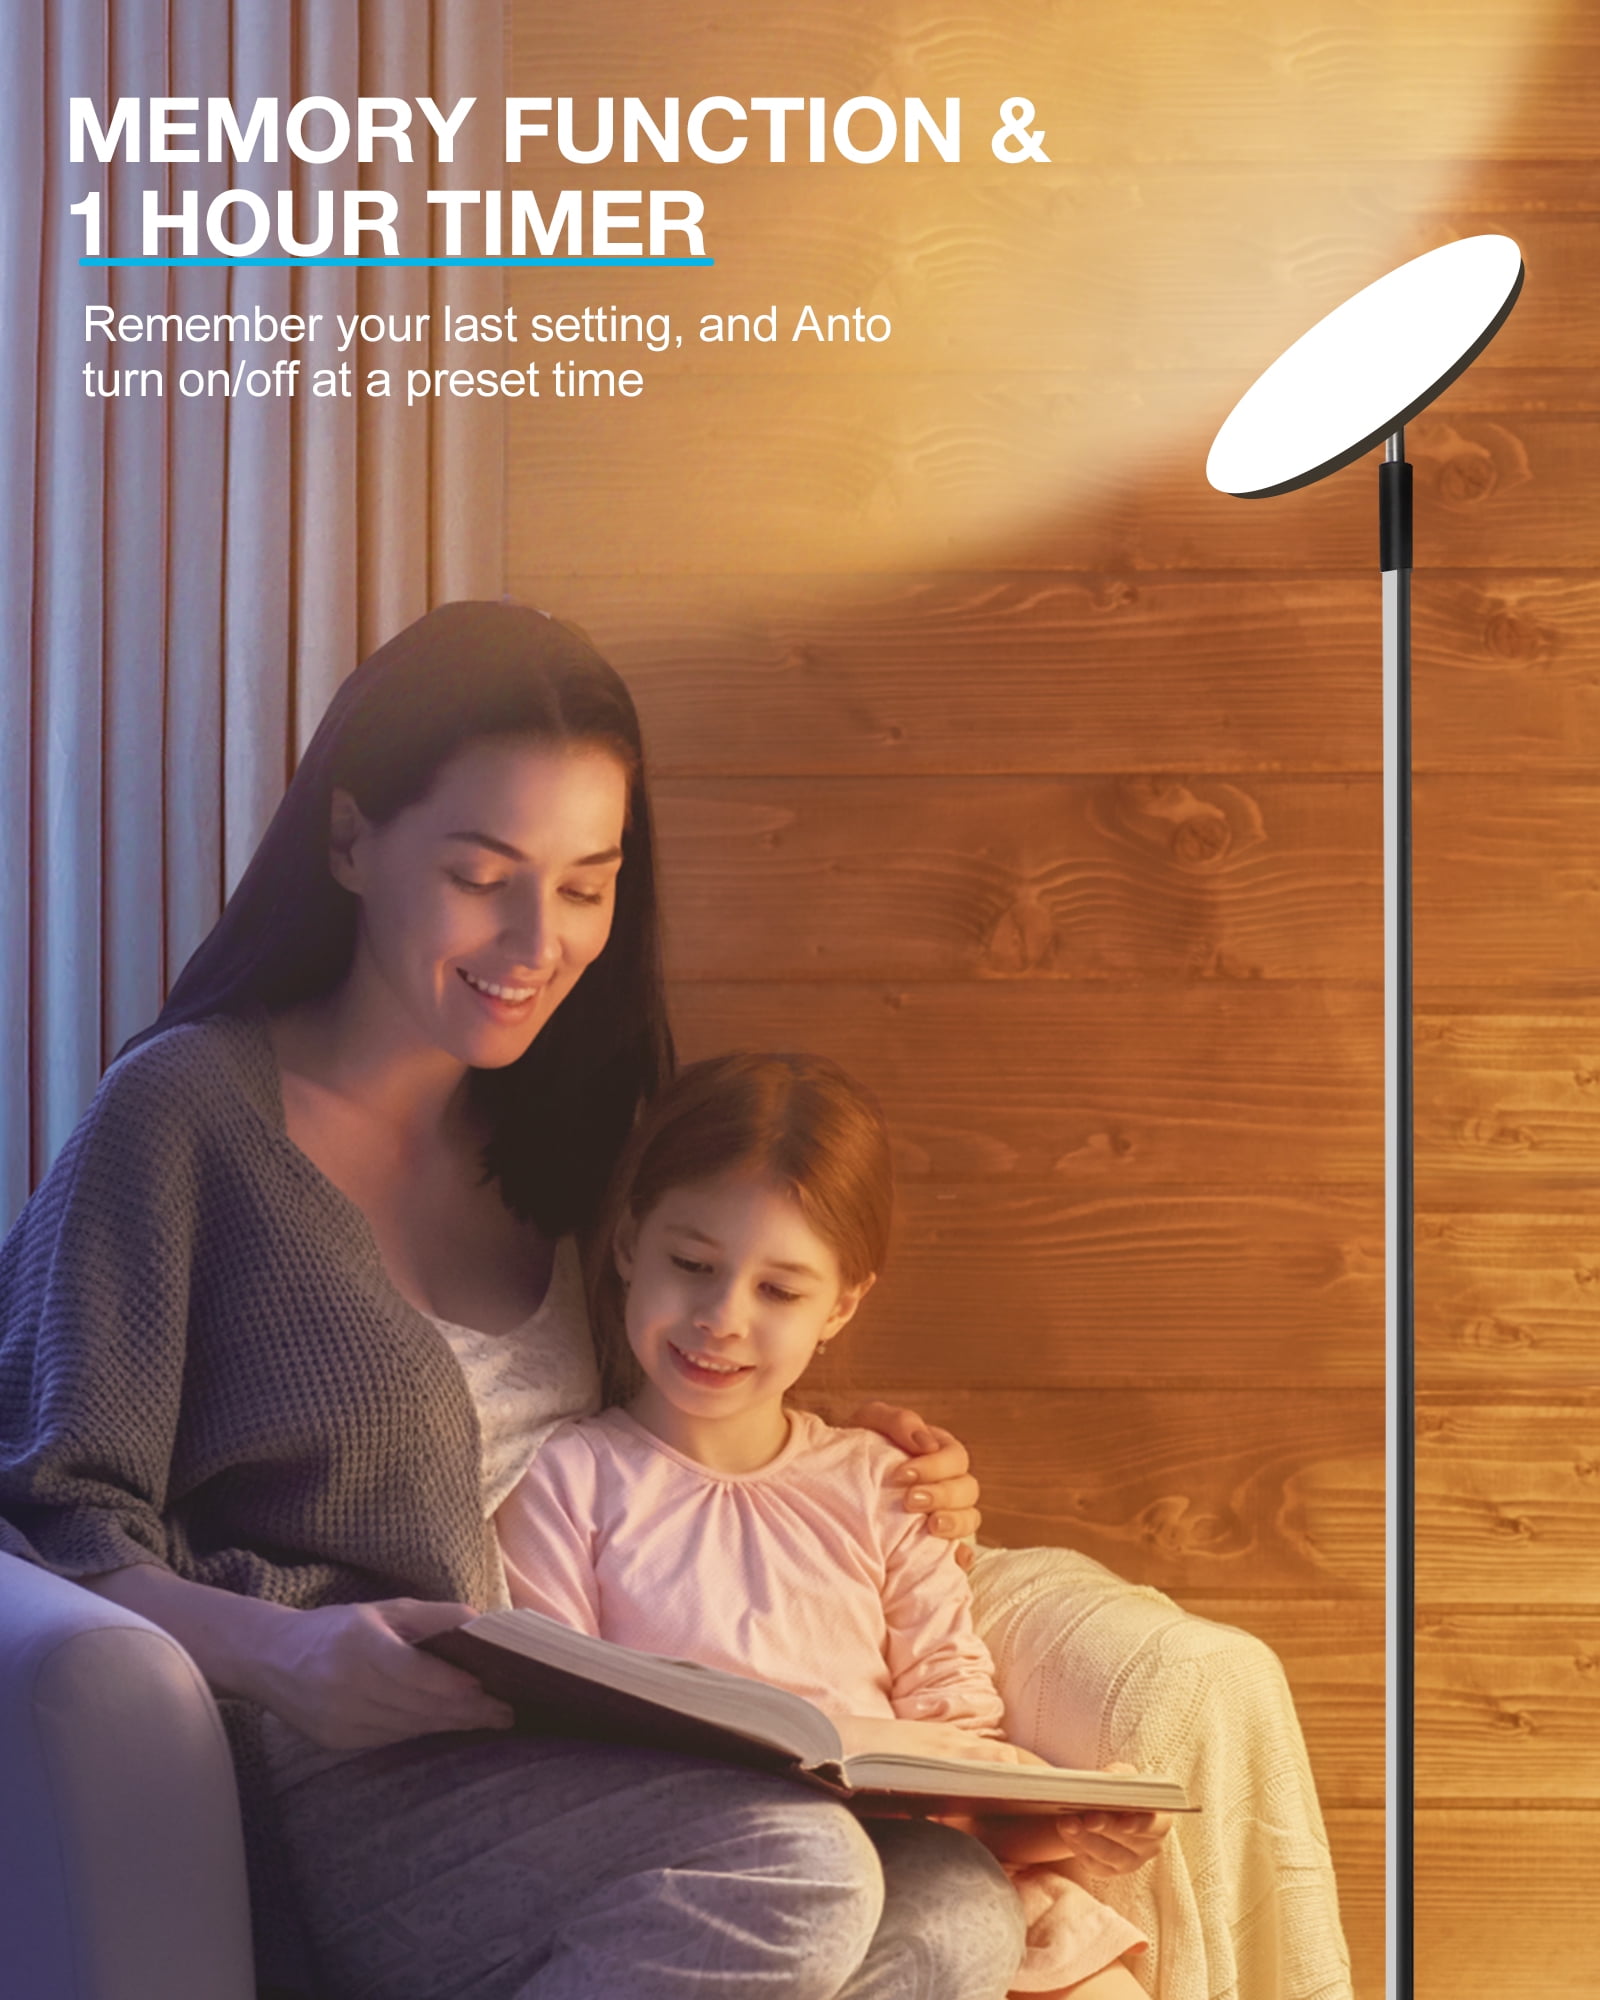 OUTON S1 Floor Lamp, 2-in-1 Smart RGBIC Corner Lamp & 30W/3000LM Brigh